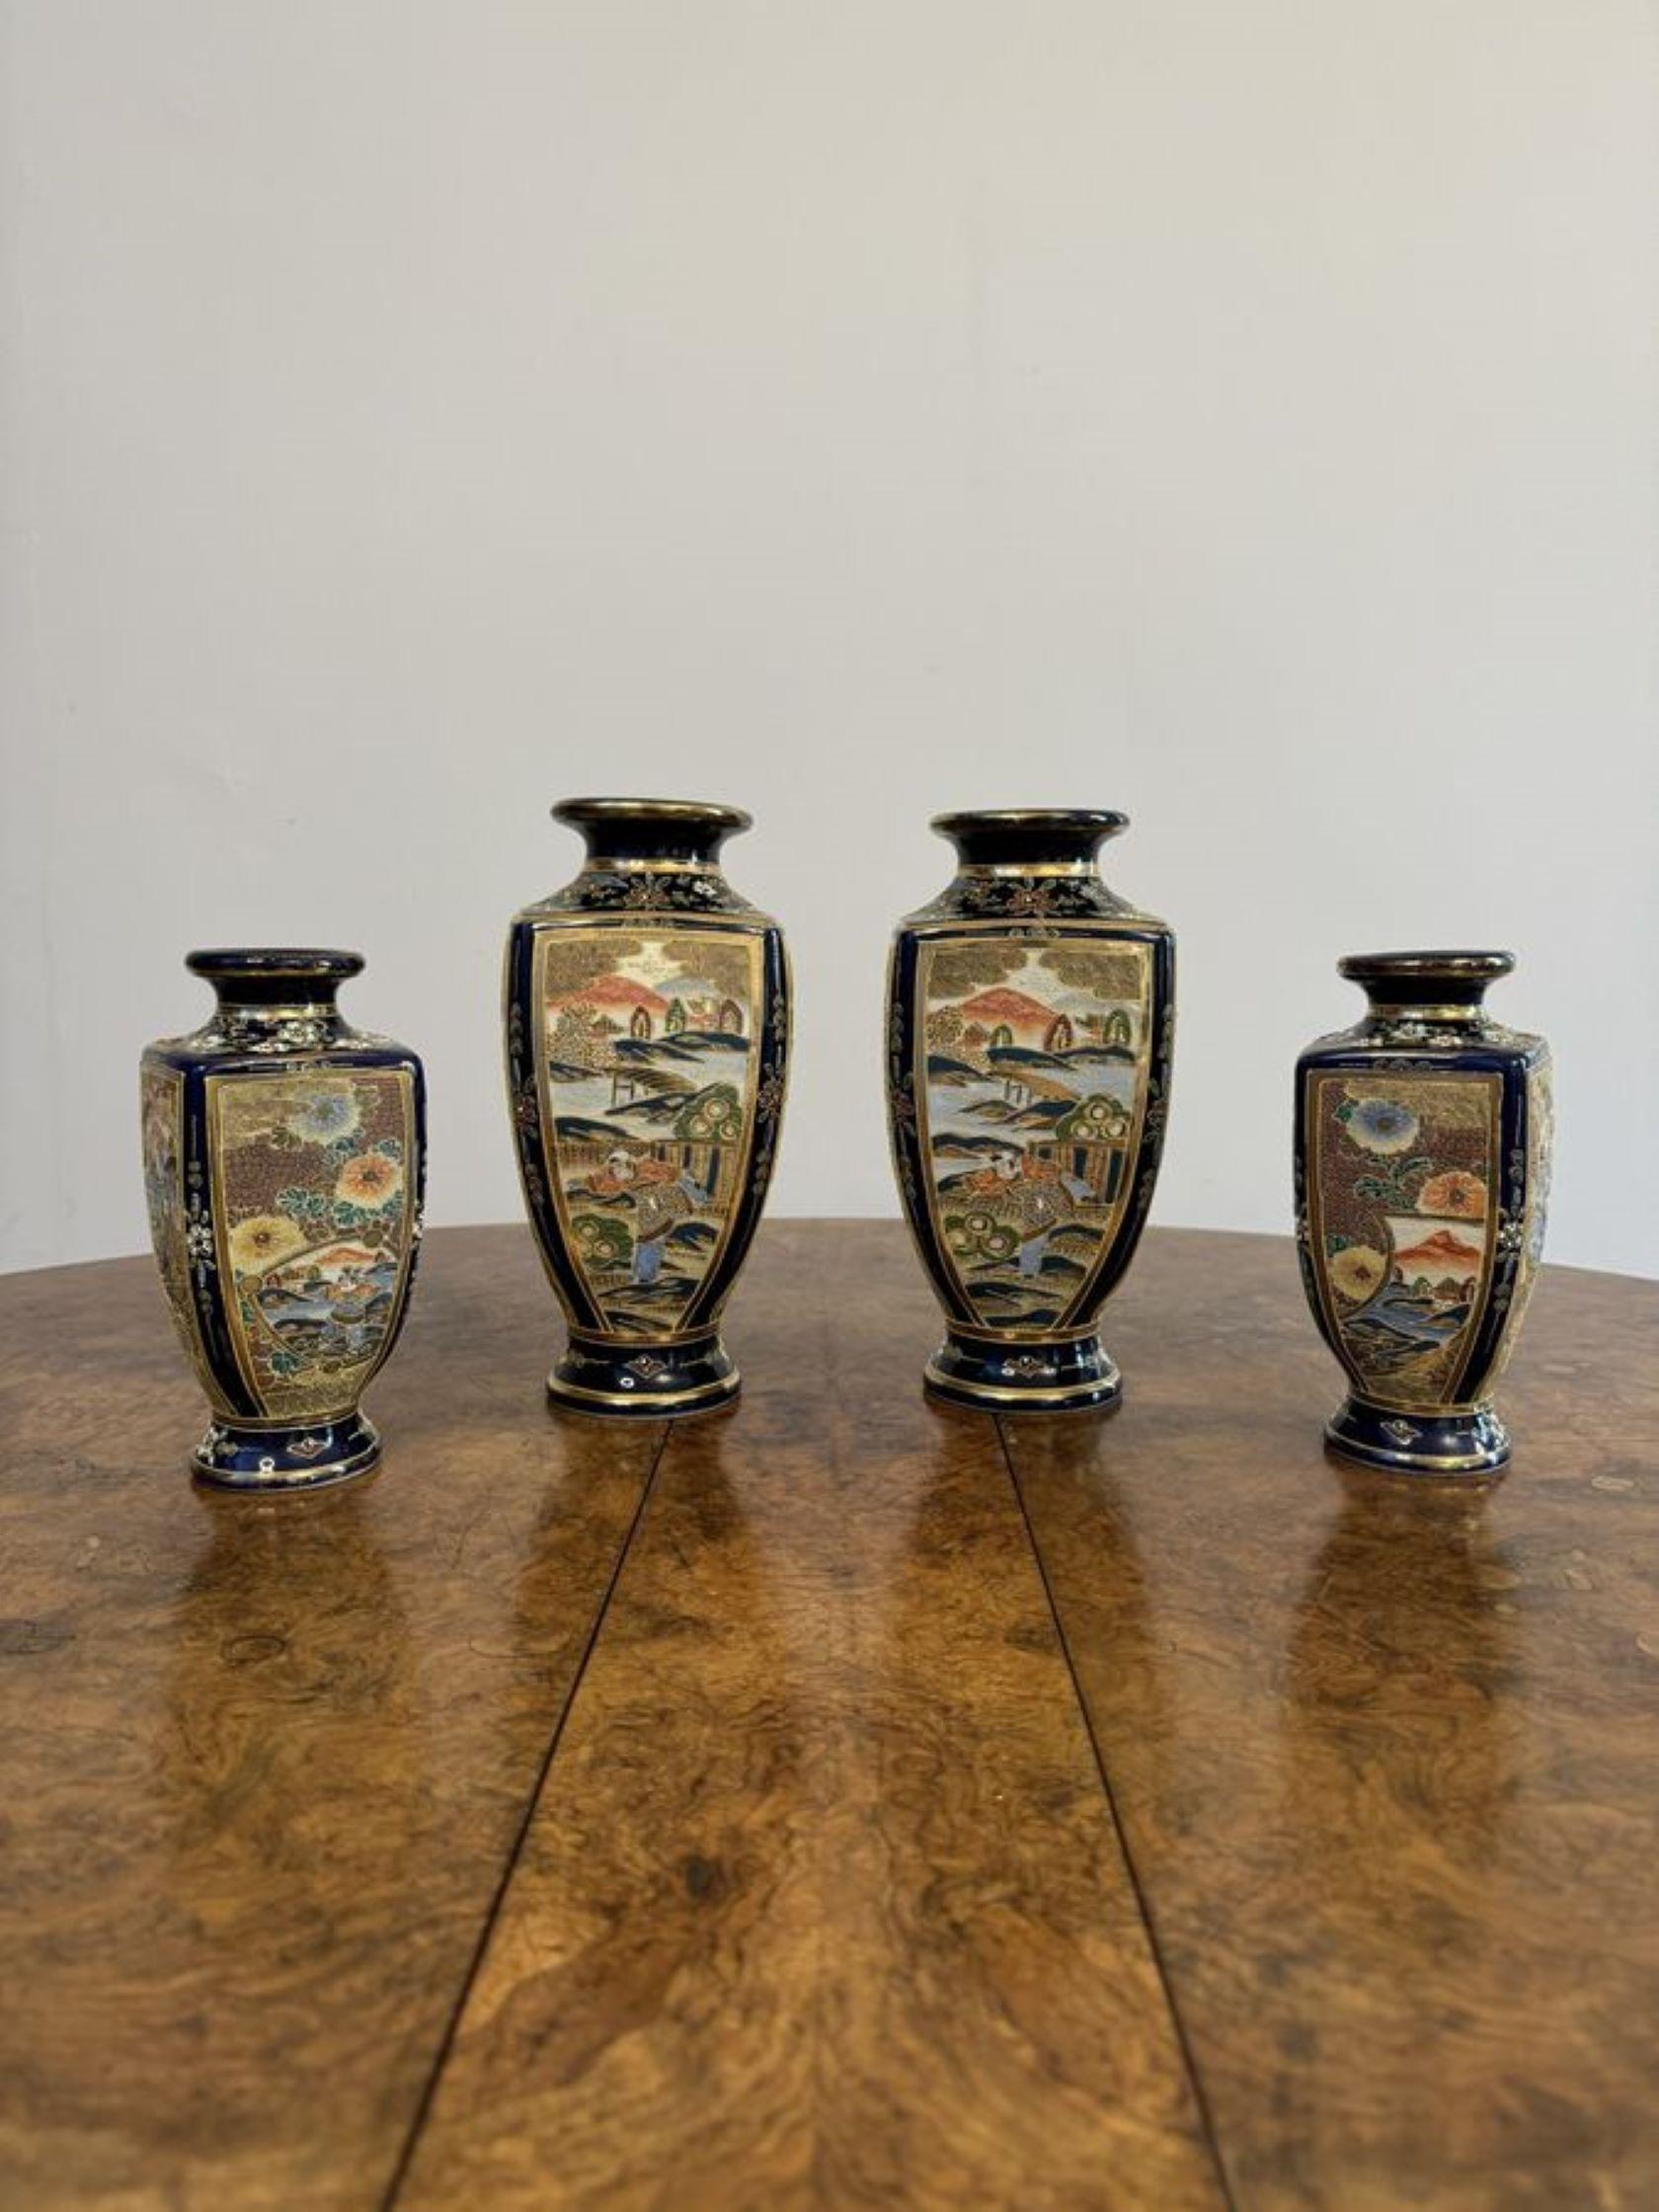 Outstanding quality antique Japanese satsuma vase garniture, having a quality garniture of shaped Japanese Satsuma vases with gilded circular shaped tops, with fantastic detailed hand painted decoration of figural and landscape scenes within blue